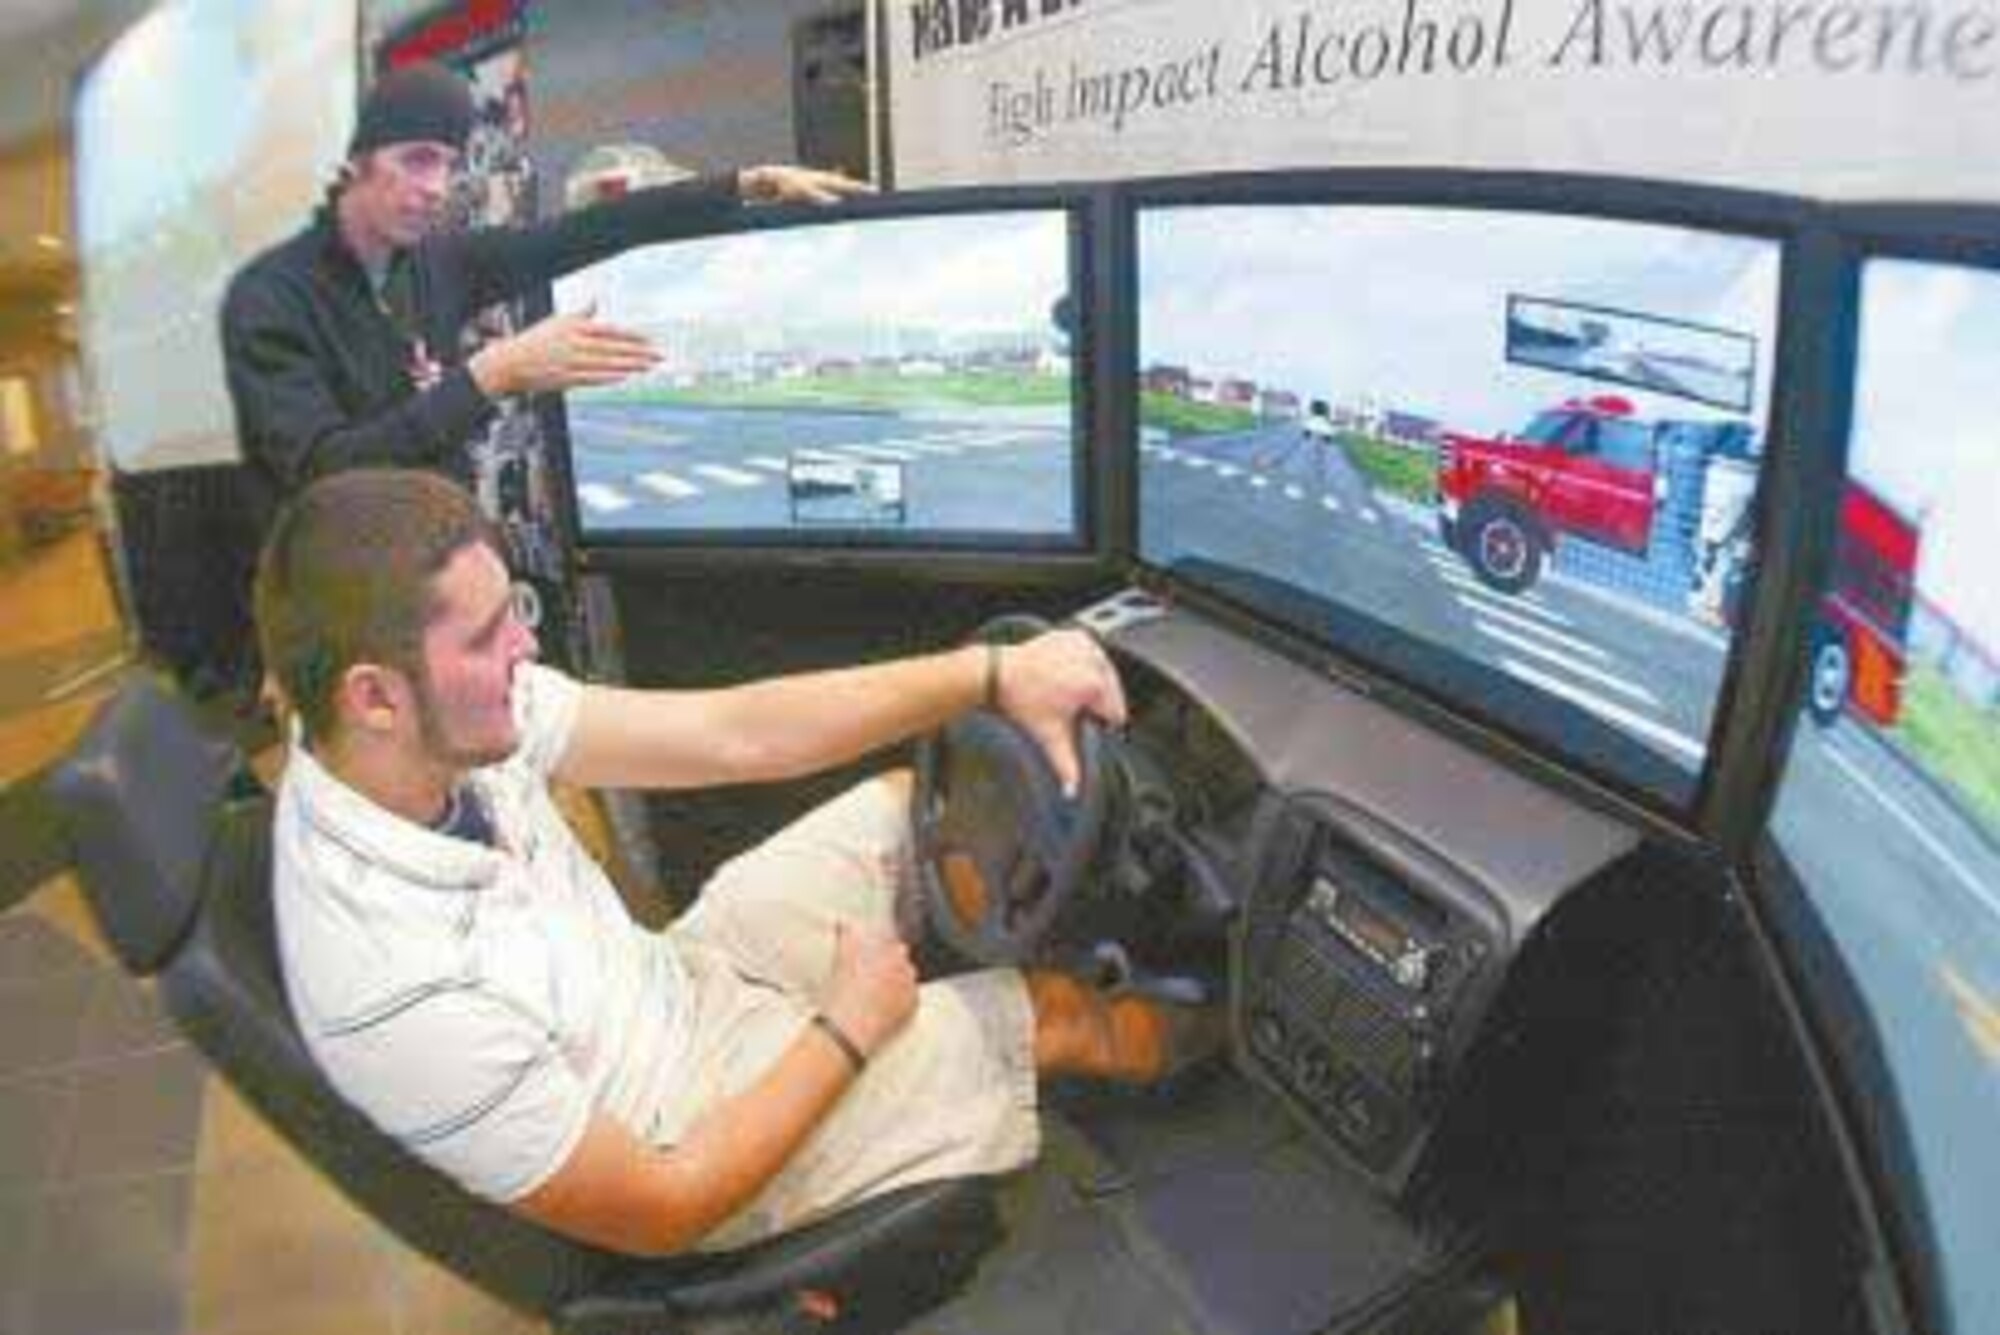 The "Save-A-Life" tour will make a stop at Tinker next week.  The interactive drunk driving simulator will be at the Tinker Base Exchange from 9 a.m. to 6 p.m. Wednesday.  (Courtesy photo)